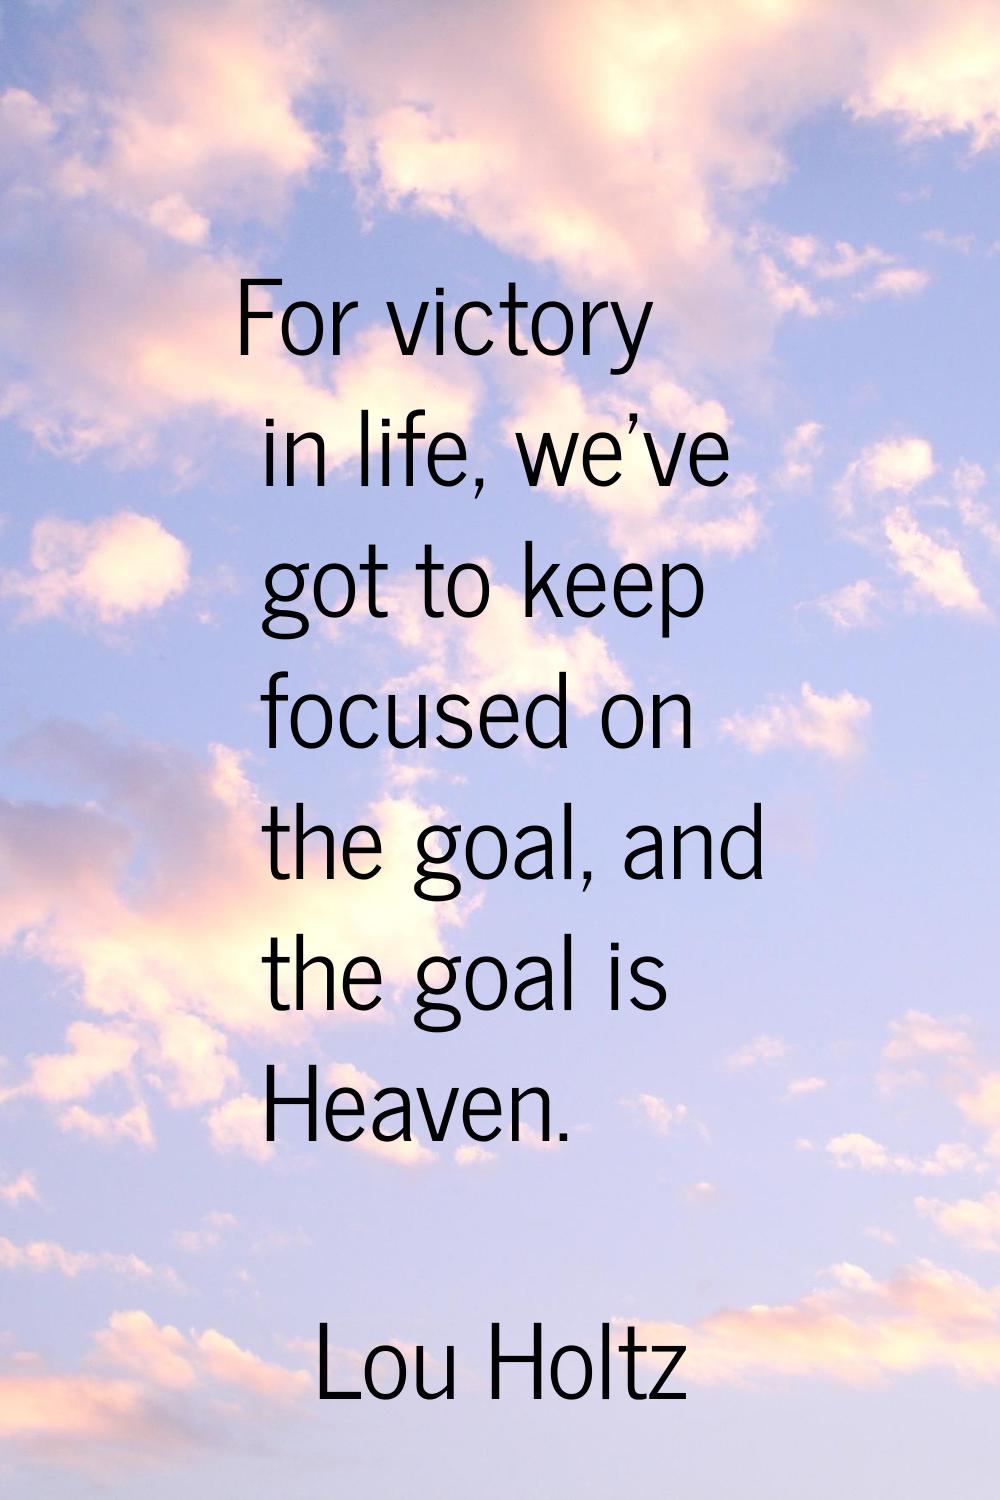 For victory in life, we've got to keep focused on the goal, and the goal is Heaven.